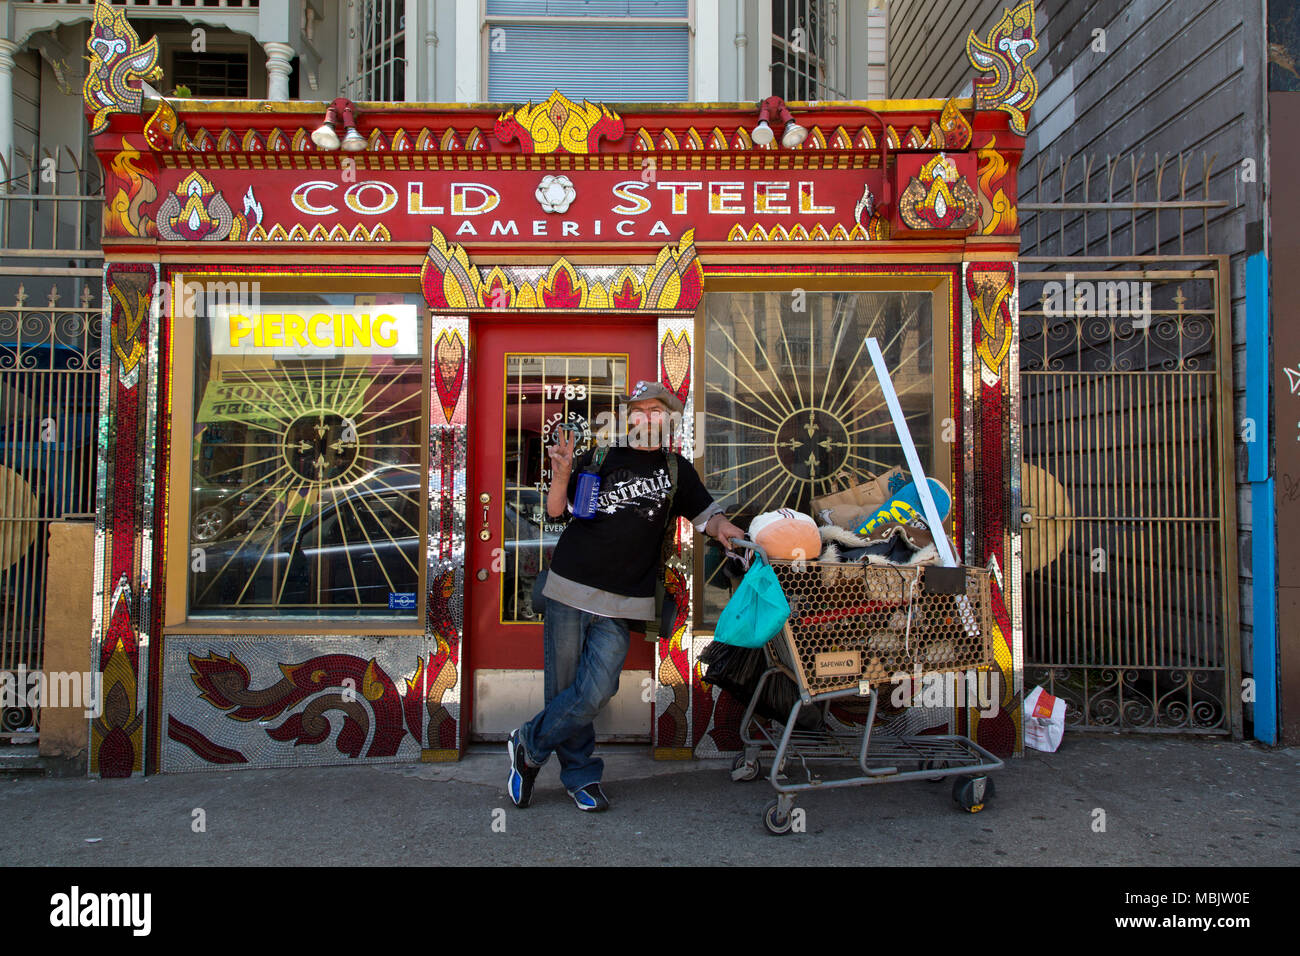 Cold Steel America Reviews  San Francisco Tattoo Shops